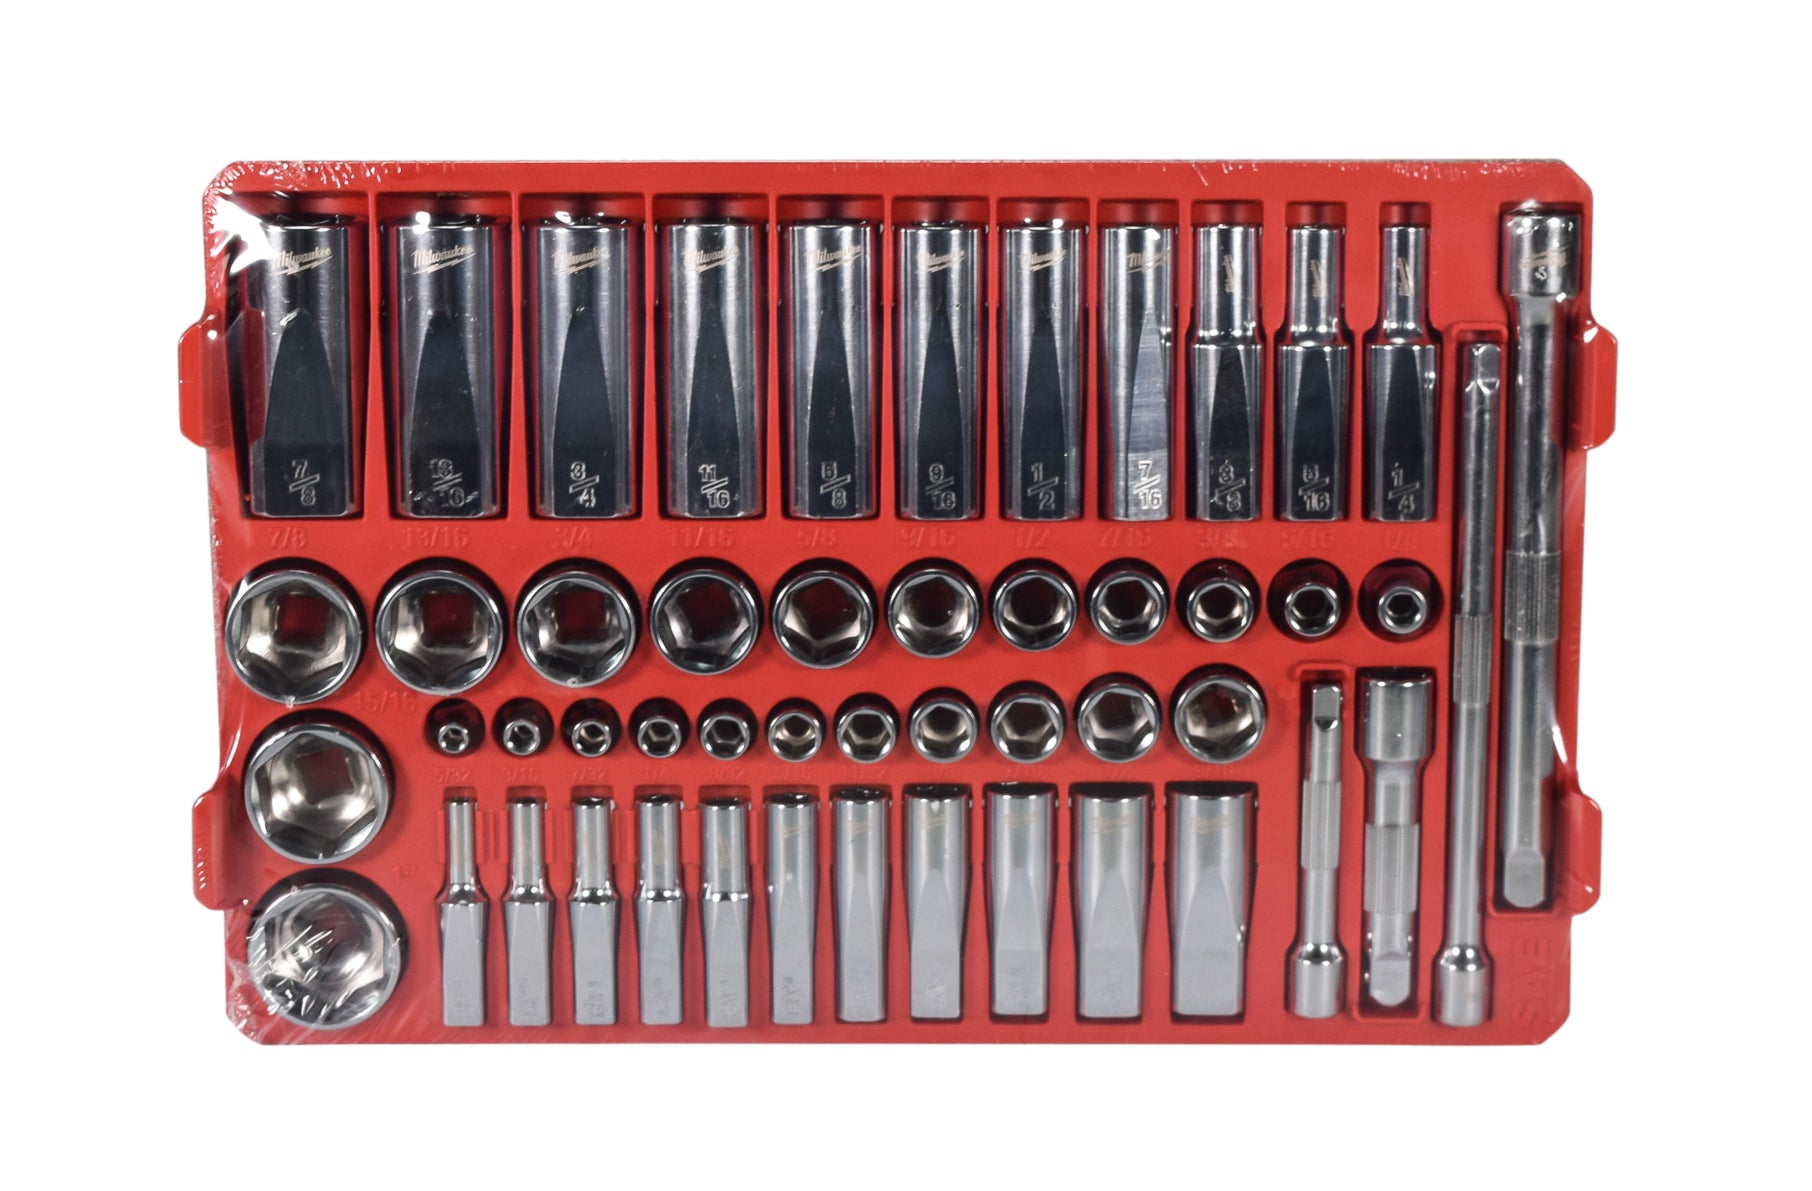 Milwaukee 48-22-9486 3/8 in. and 1/4 in. Drive SAE/Metric Ratchet and Socket Mechanics Tool Set with PACKOUT Case (106-Piece)